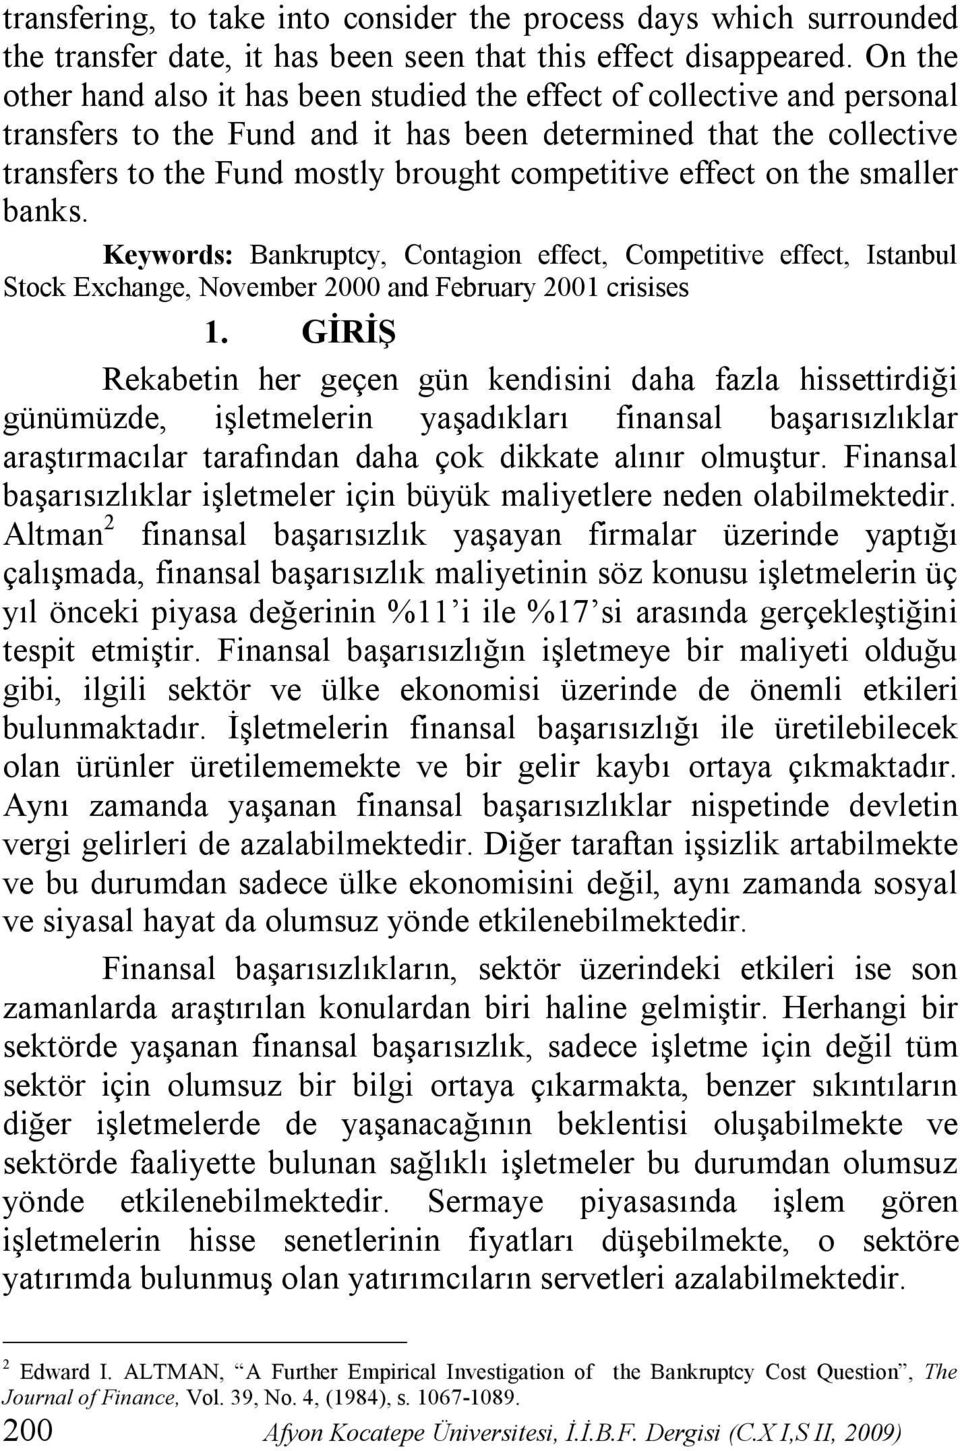 effect on the smaller banks. Keywords: Bankruptcy, Contagion effect, Competitive effect, Istanbul Stock Exchange, November 2000 and February 2001 crisises 1.